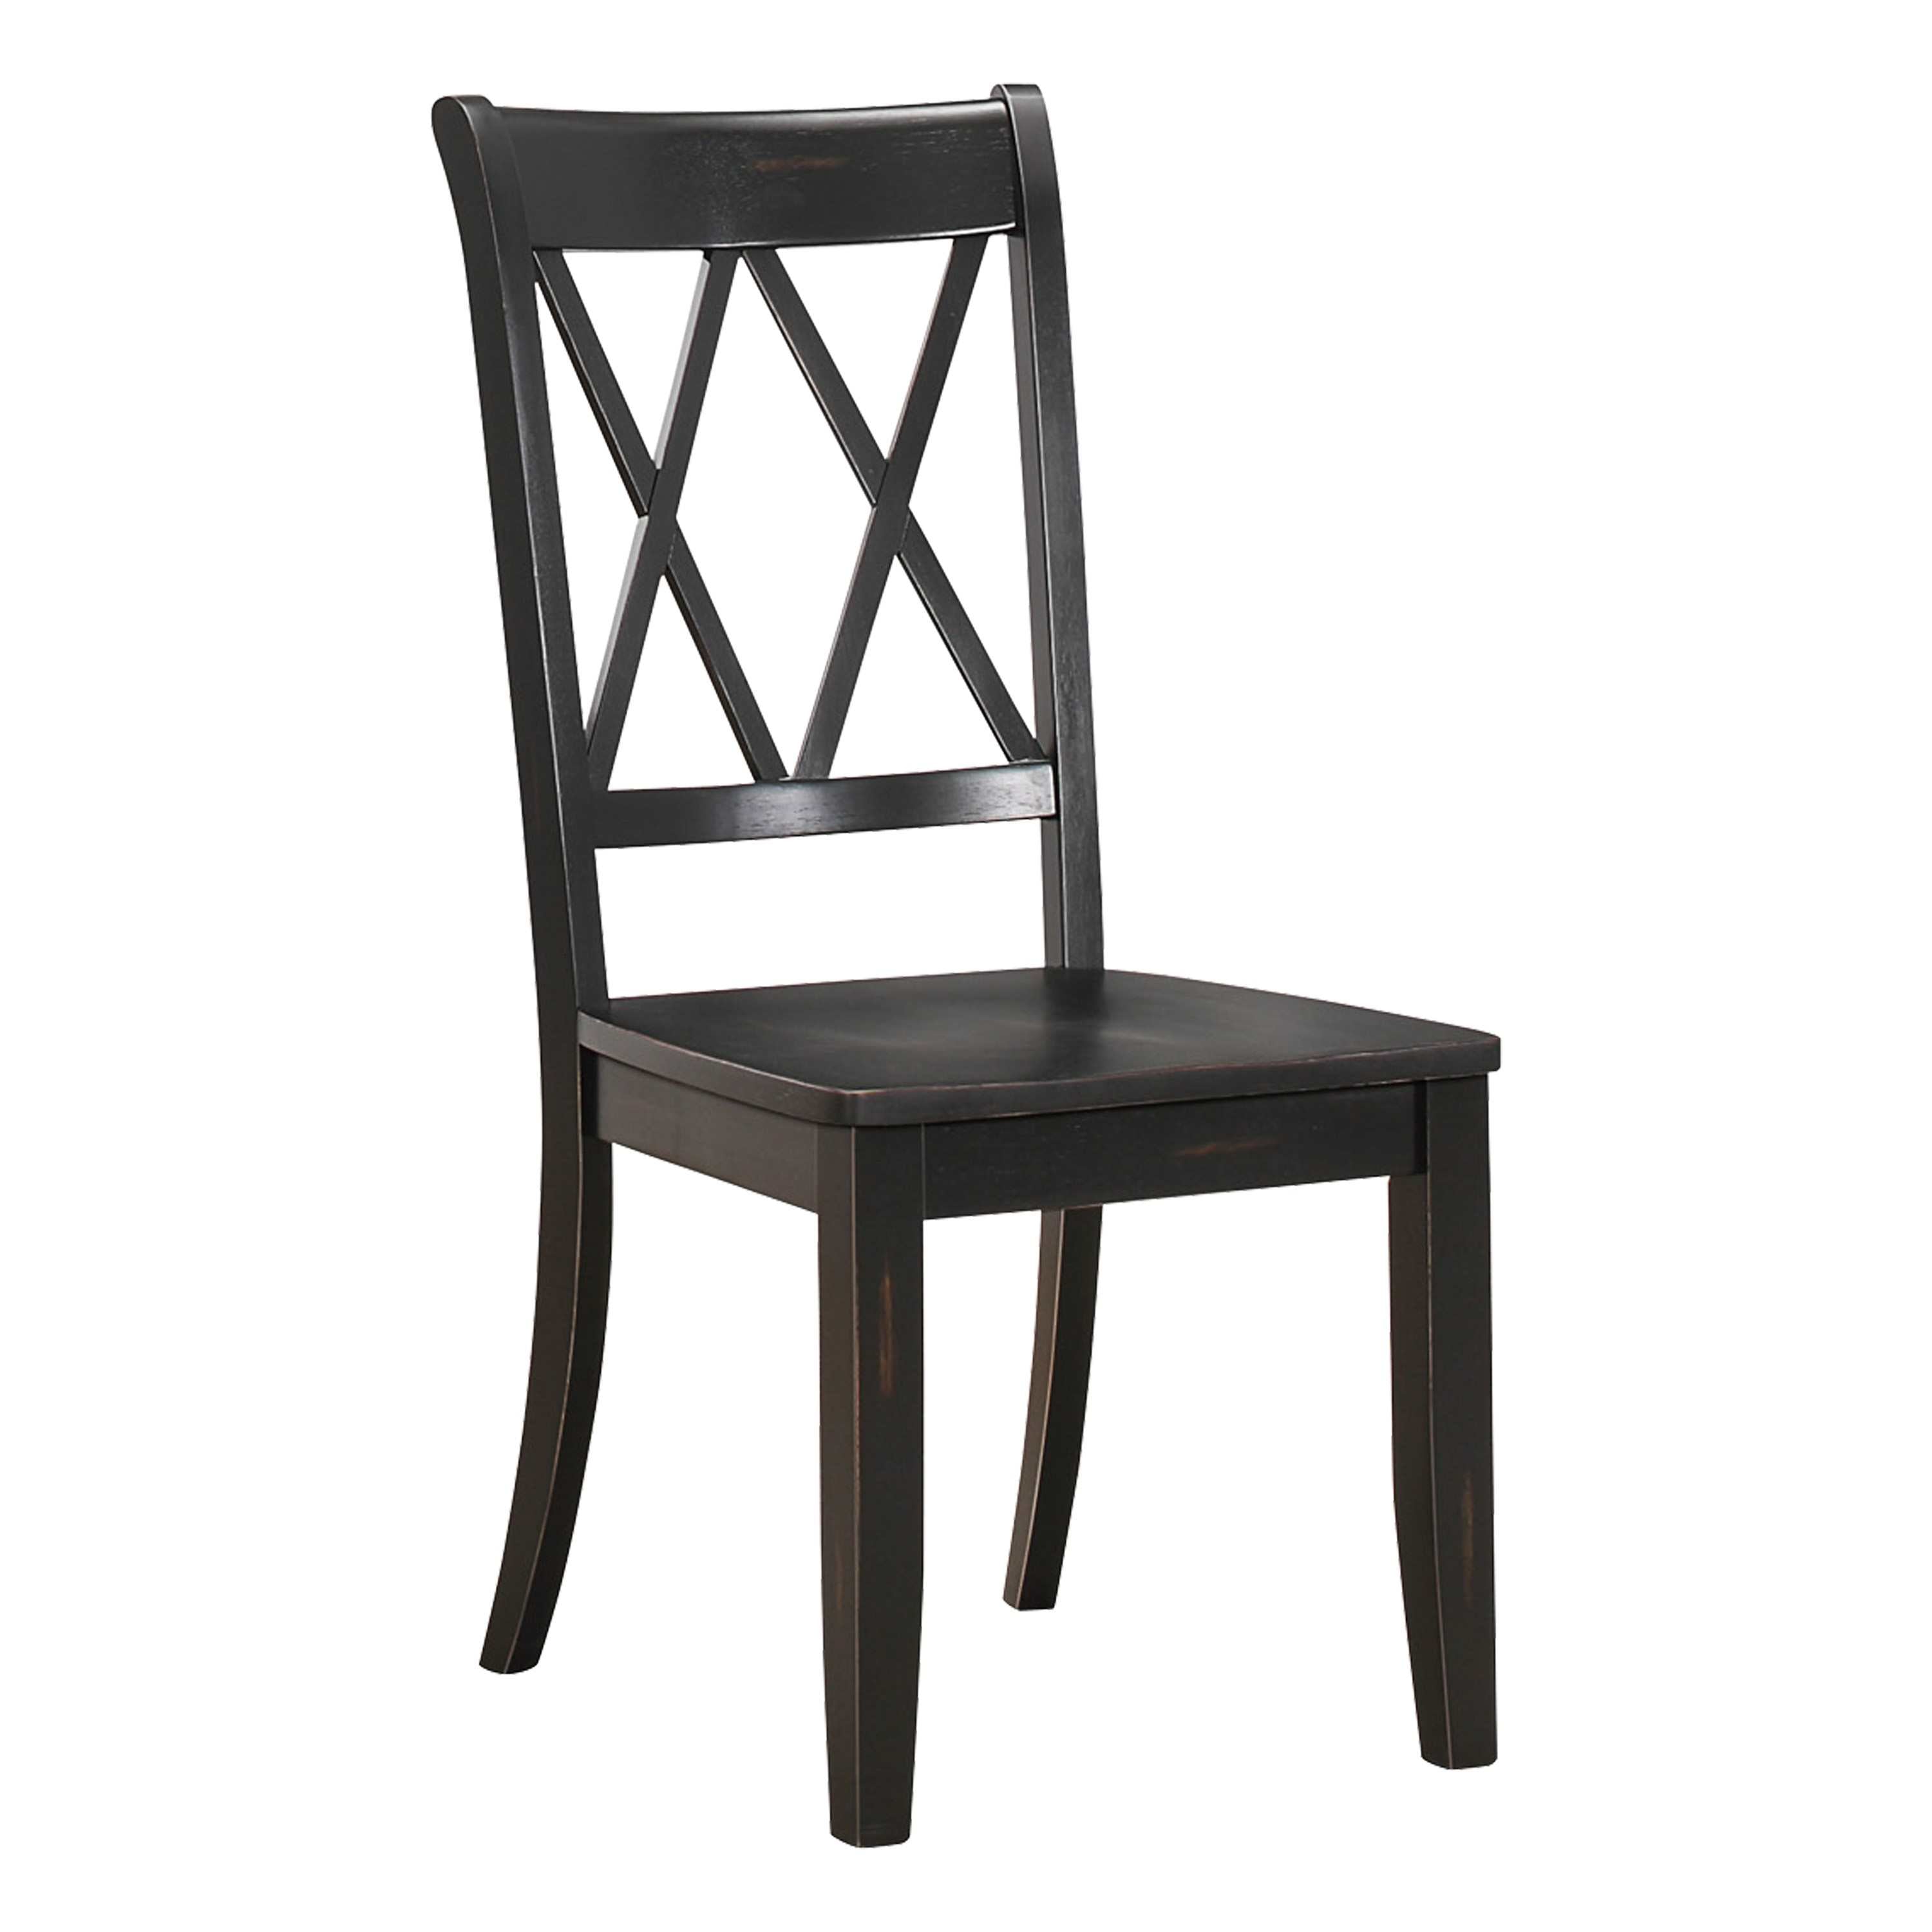 Janina Dining Collection Black 5516